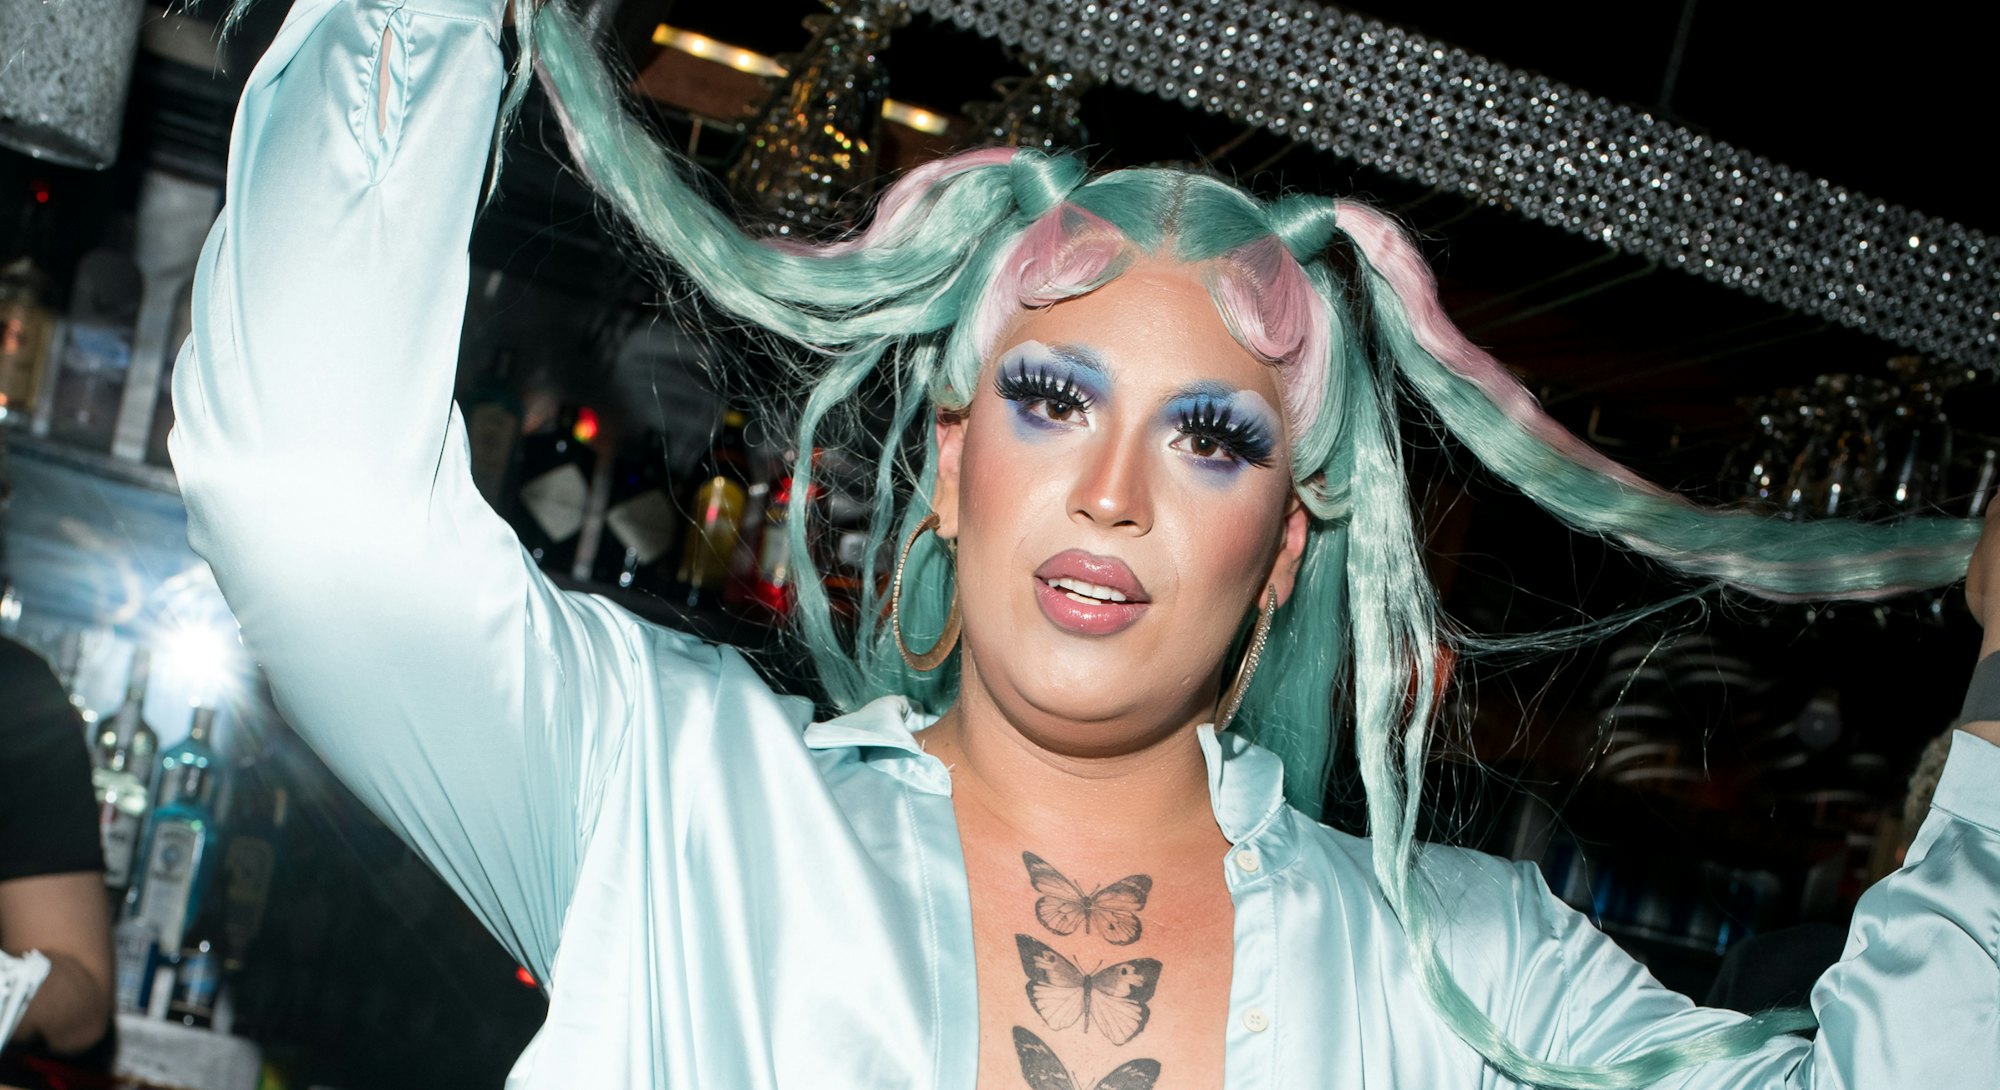 Guests celebrate Coach’s Pride campaign at the Monster nightclub in New York City on Wednesday, June...